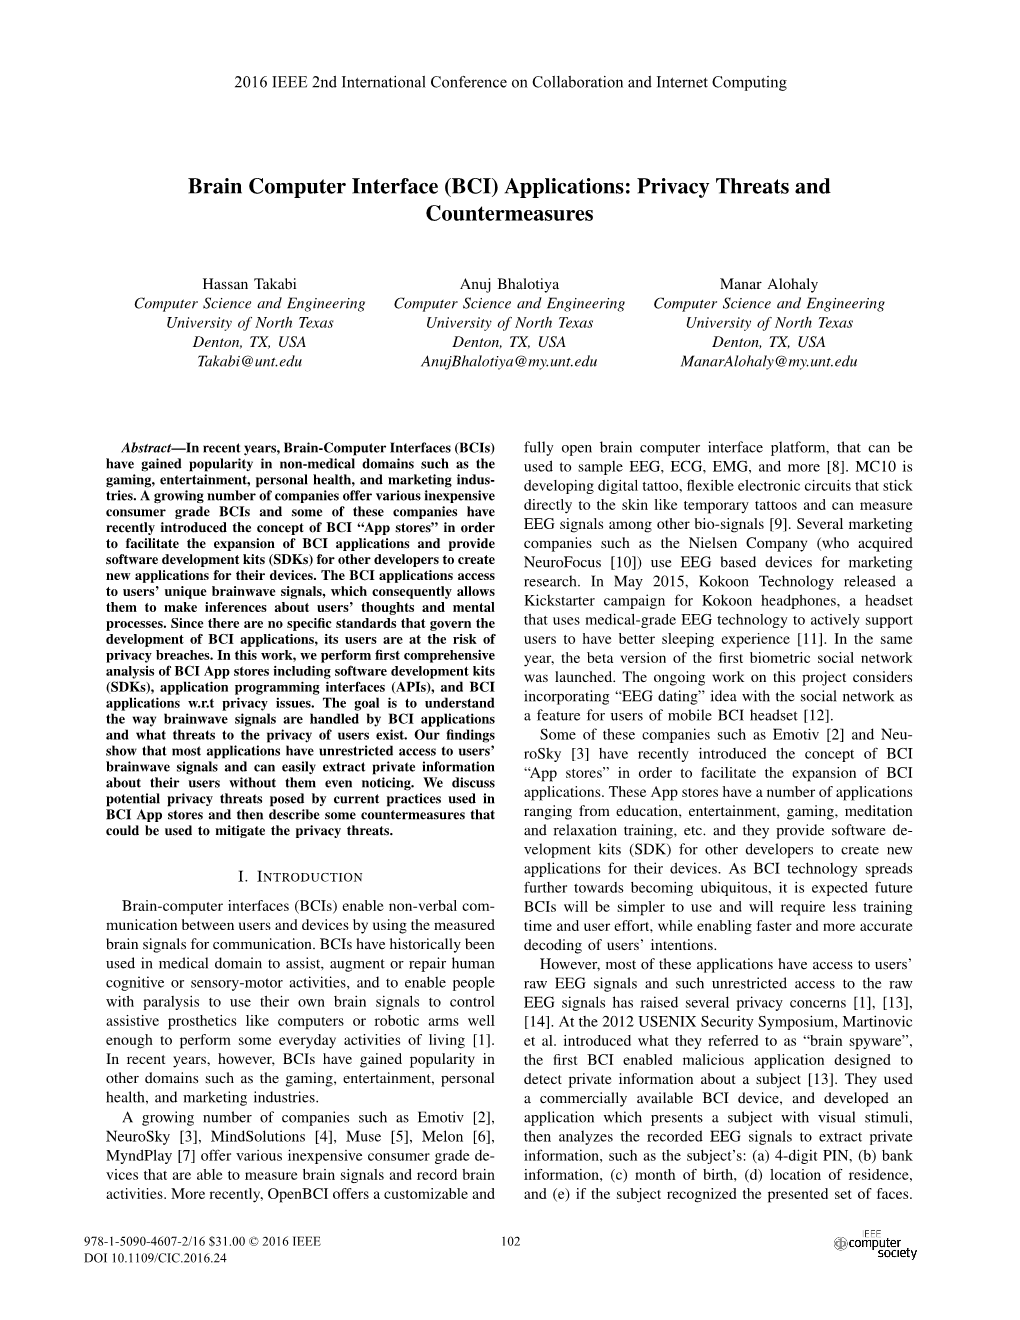 Brain Computer Interface (BCI) Applications: Privacy Threats and Countermeasures